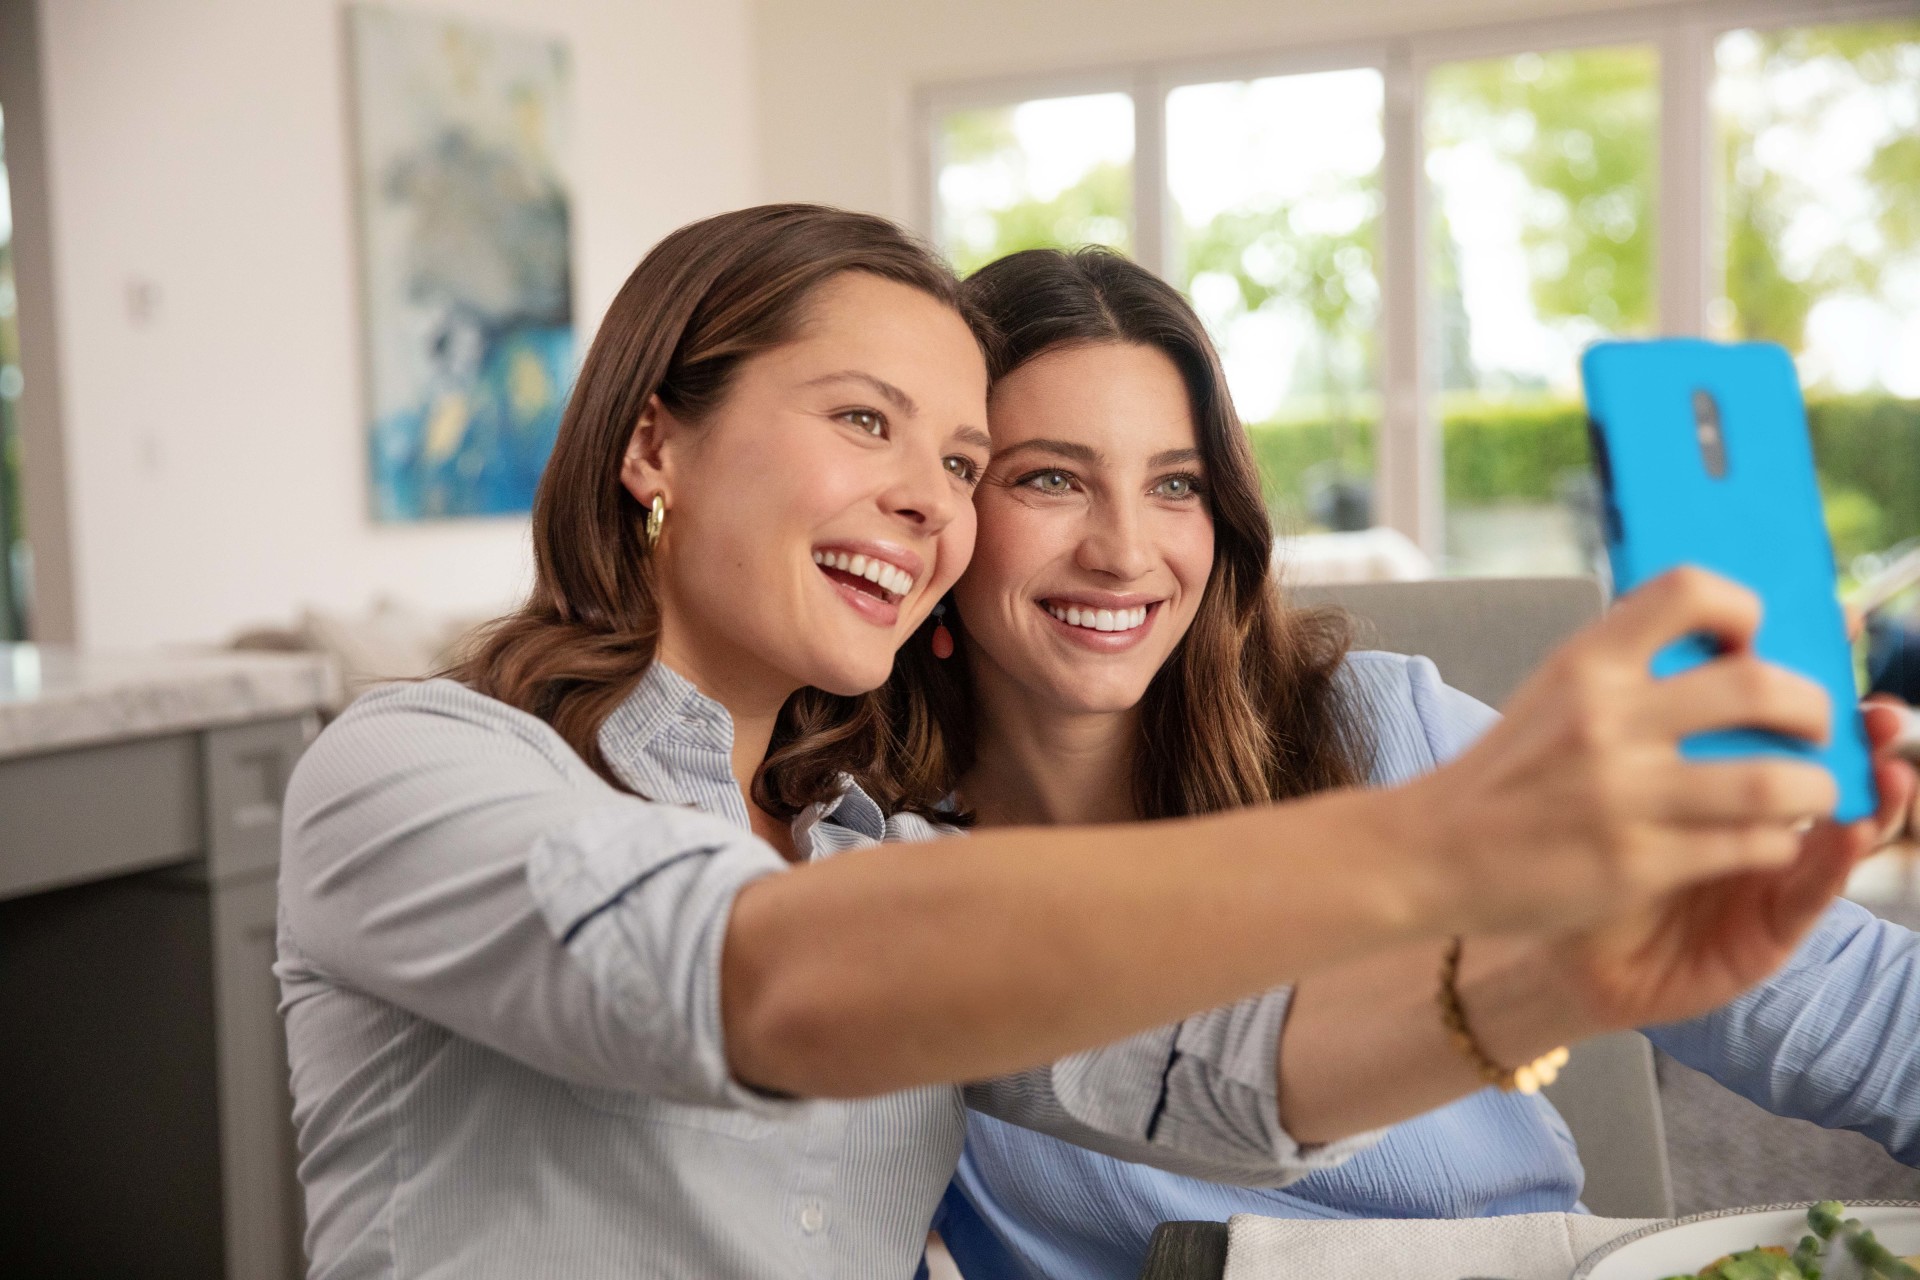 Invisalign Girls taking Selfie with Smile